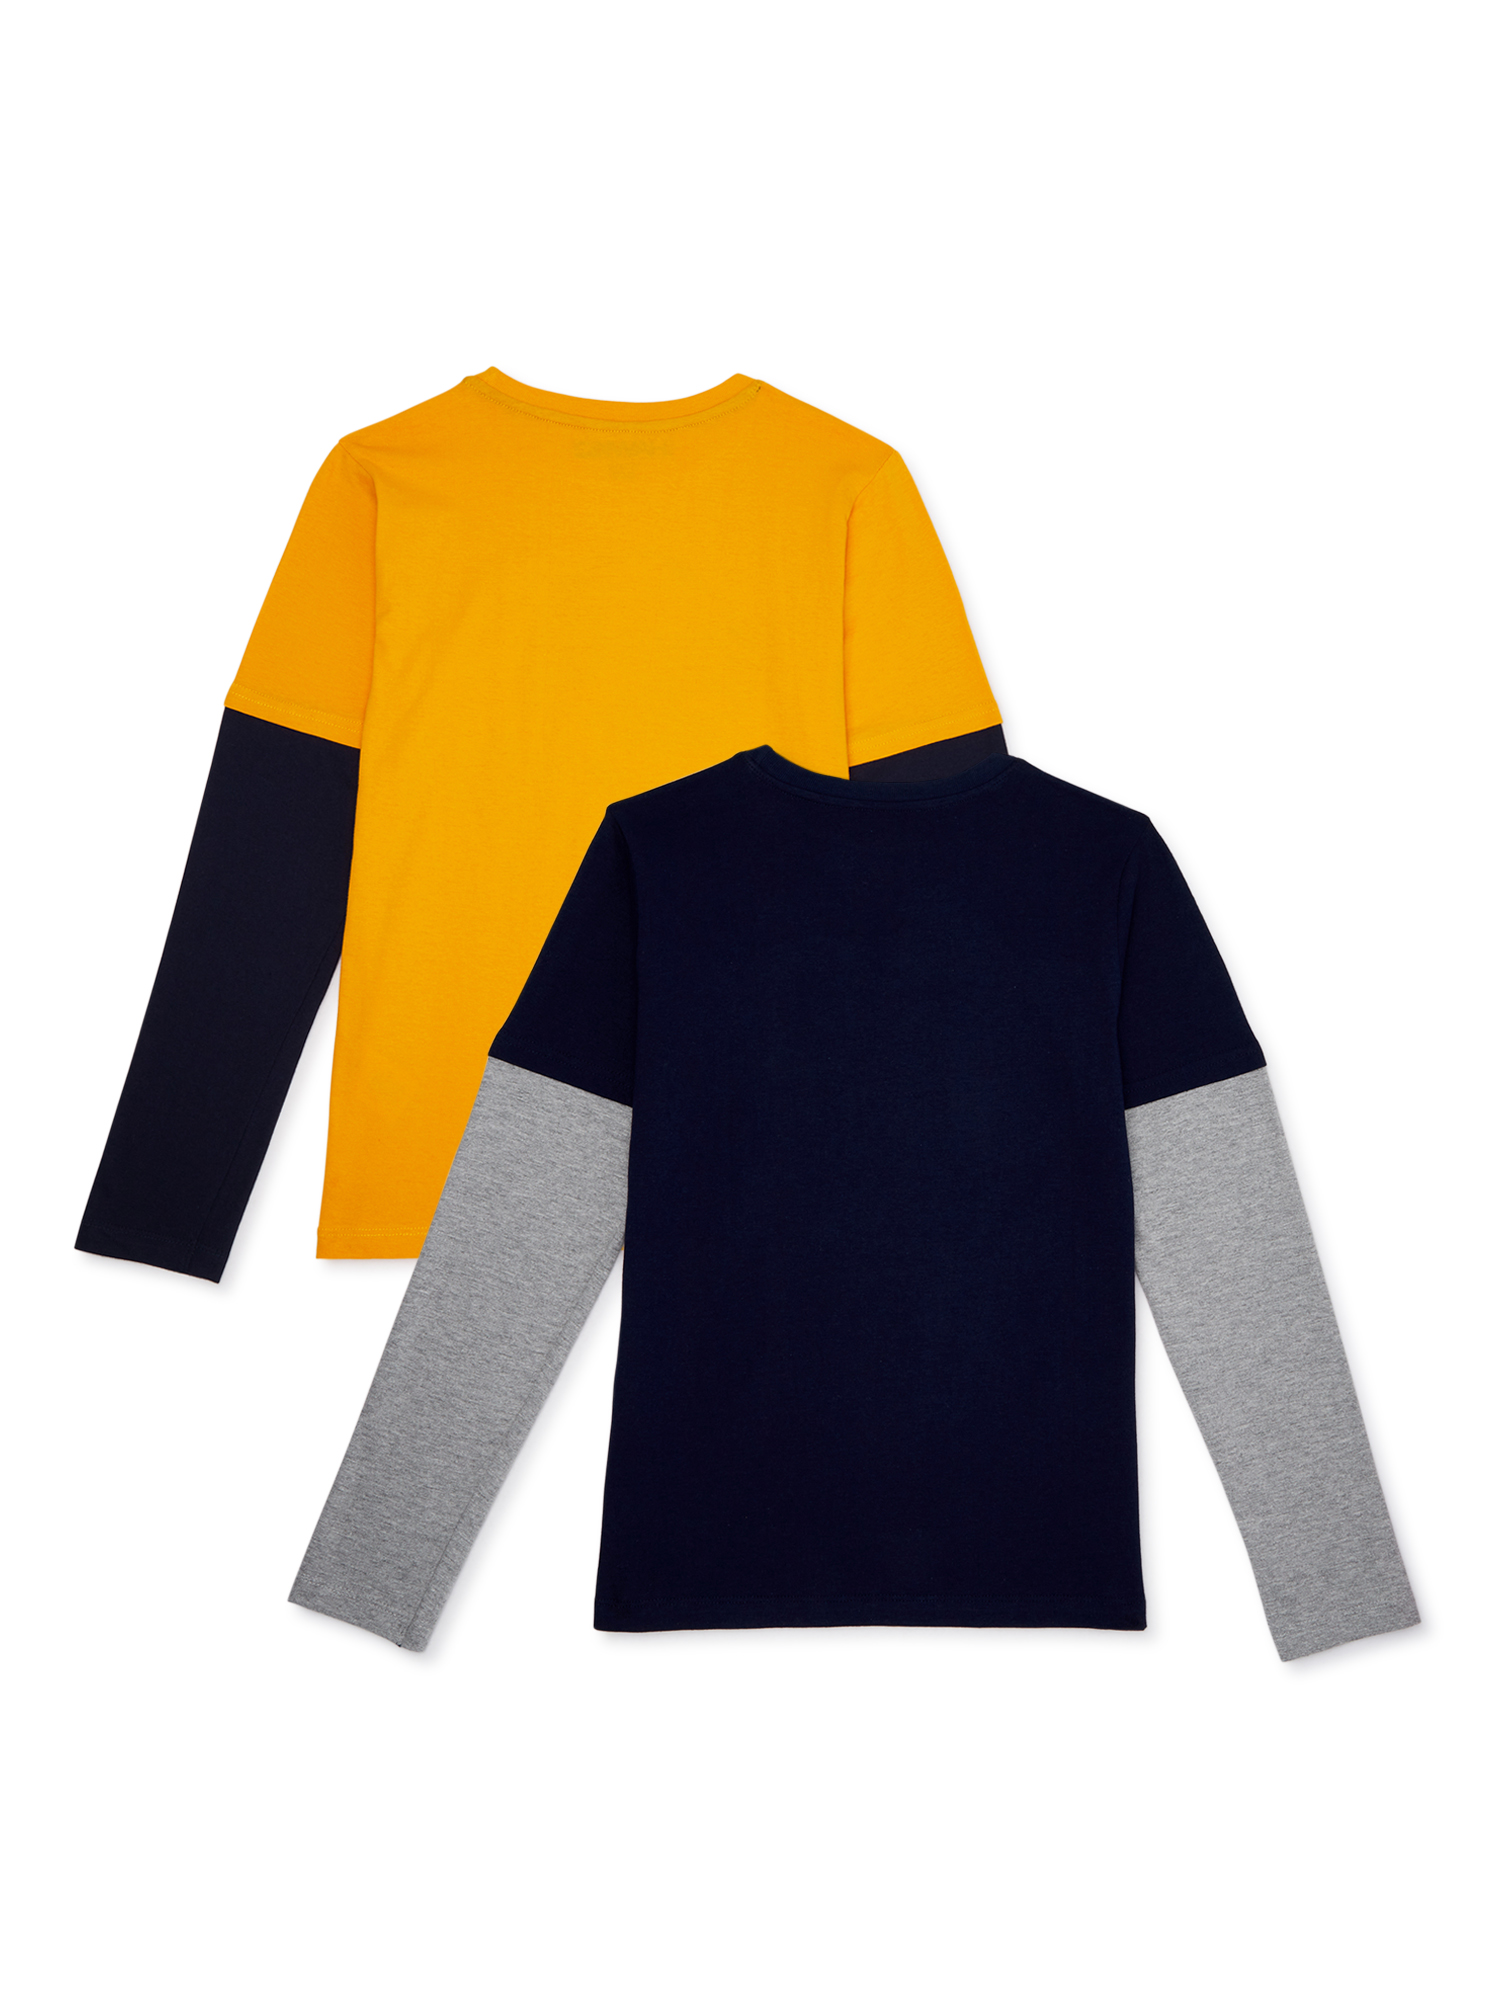 Tony Hawk Boys Hang Down Graphic Long Sleeve T-Shirt, 2-Pack, Sizes 4-16 - image 2 of 3